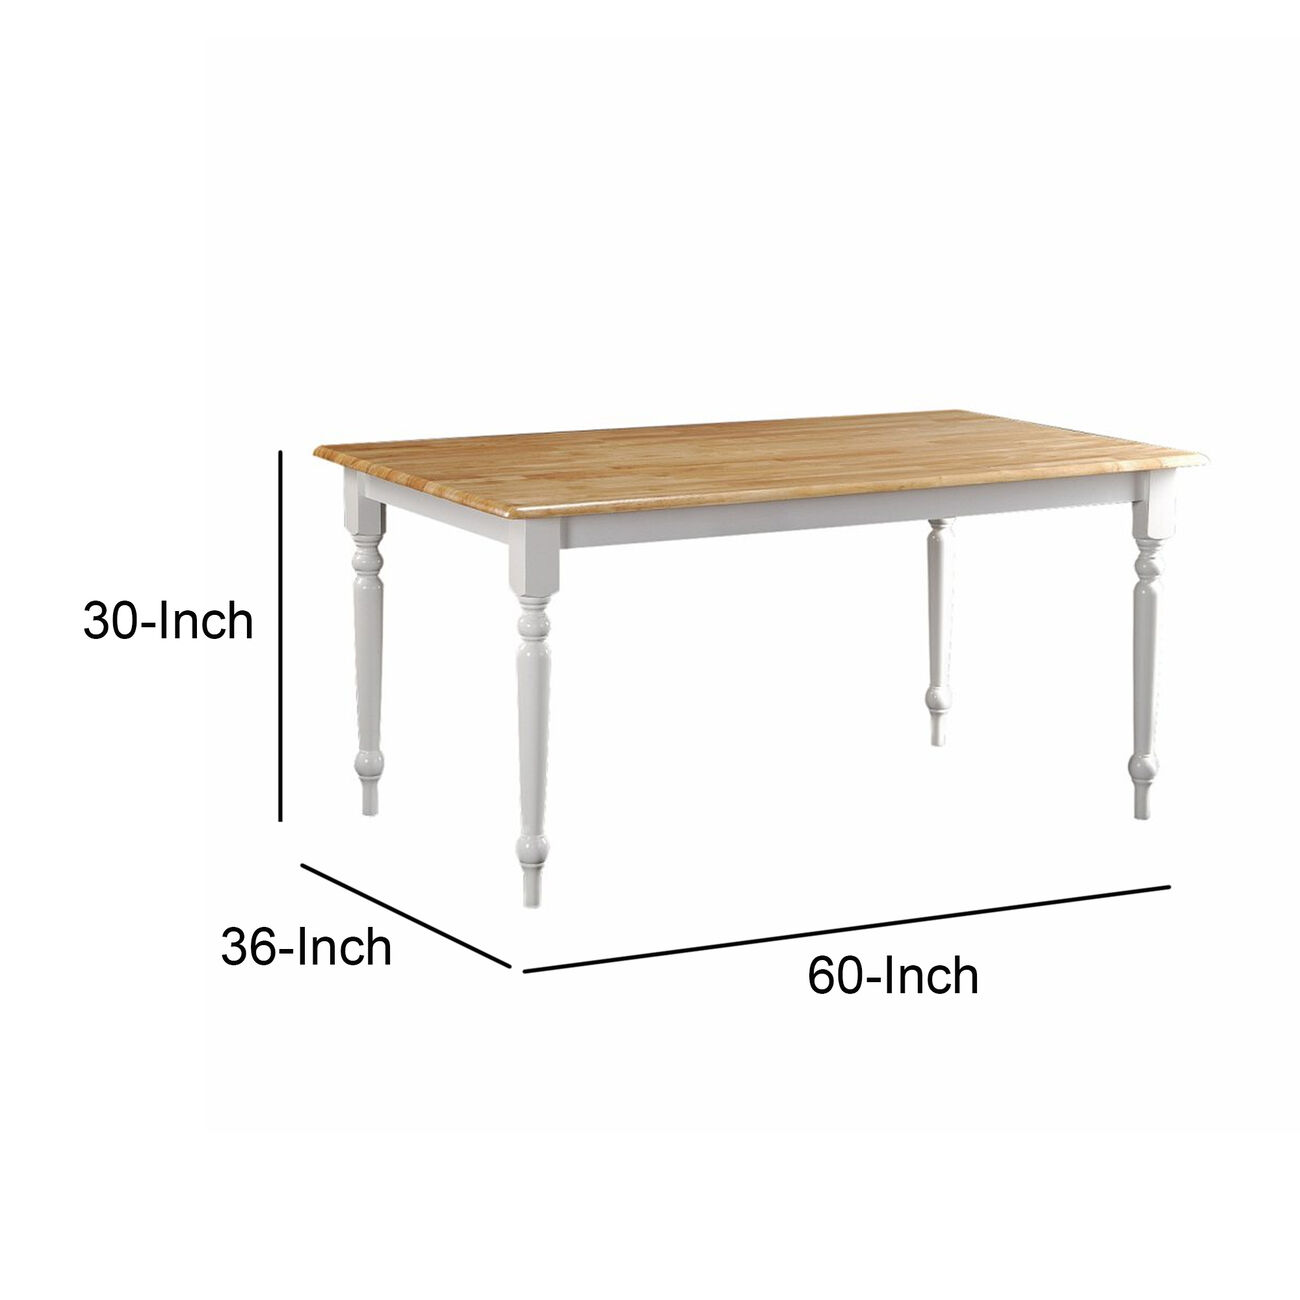 Grained Rectangular Wooden Dining Table with Turned legs, Brown and White